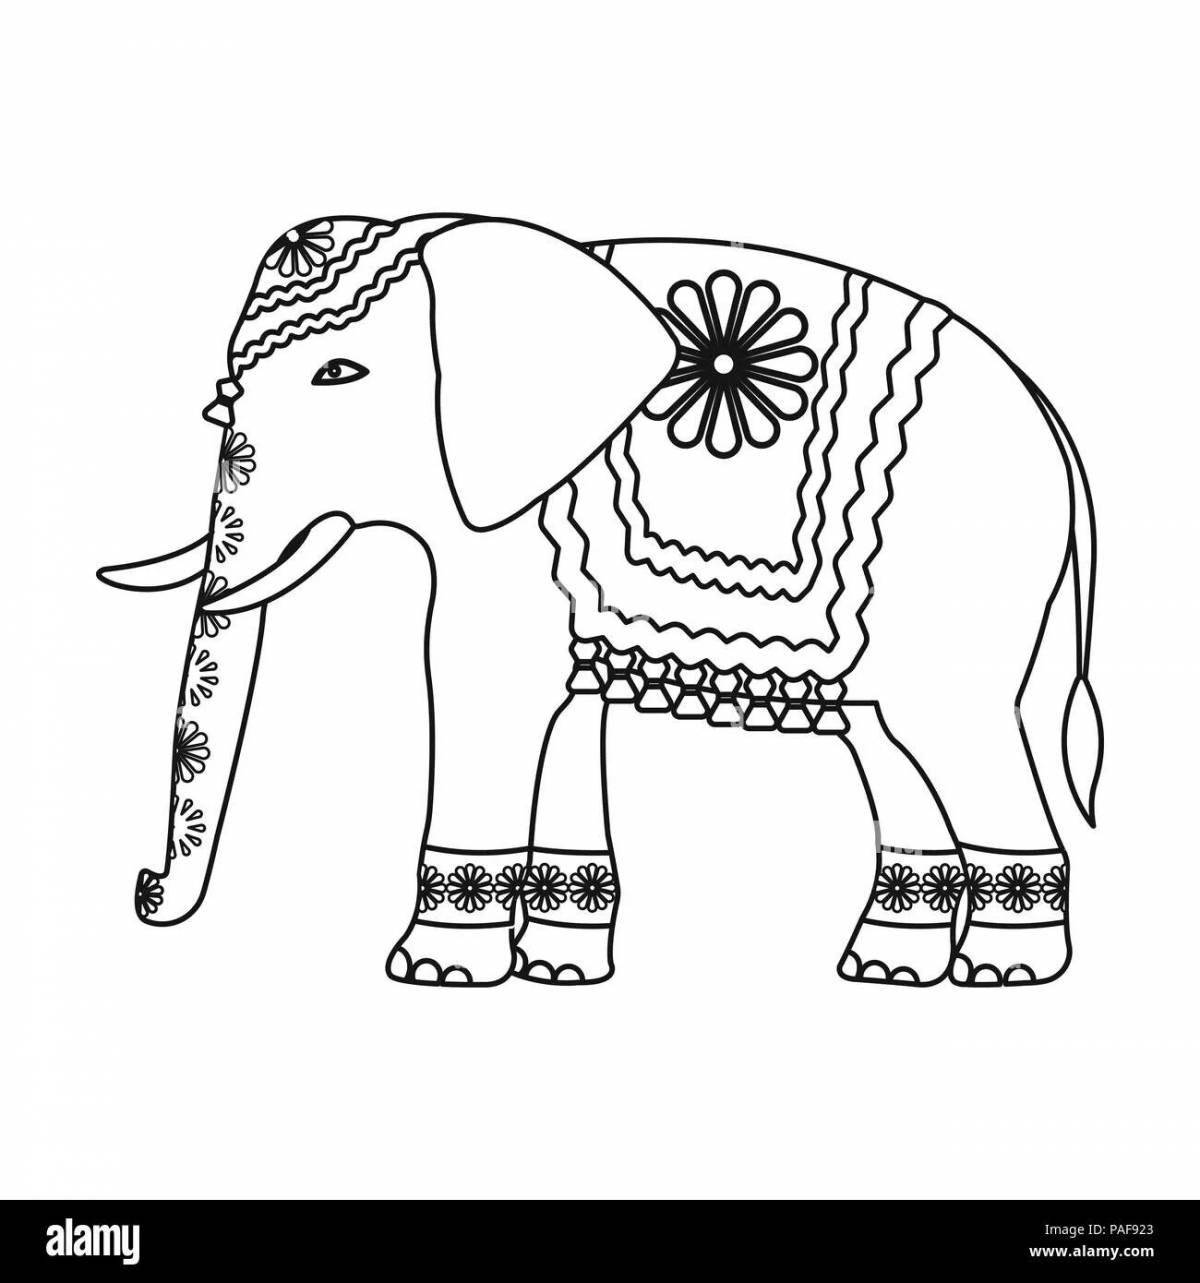 Children's Indian elephant coloring book for kids